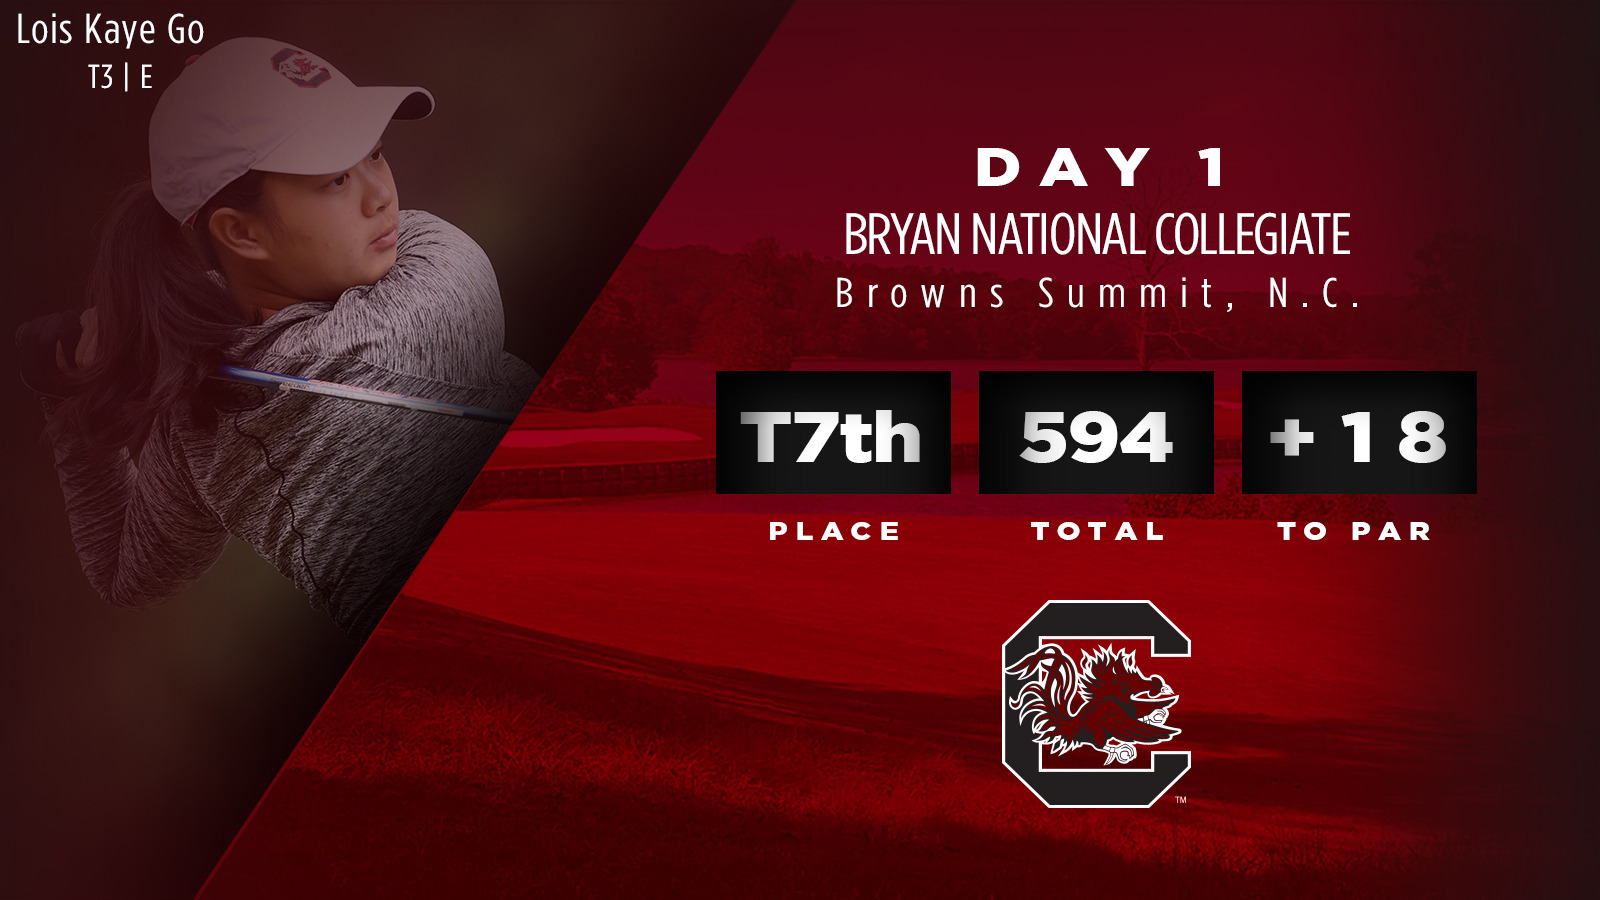 Go Paces Carolina On Opening Day Of Bryan National Collegiate